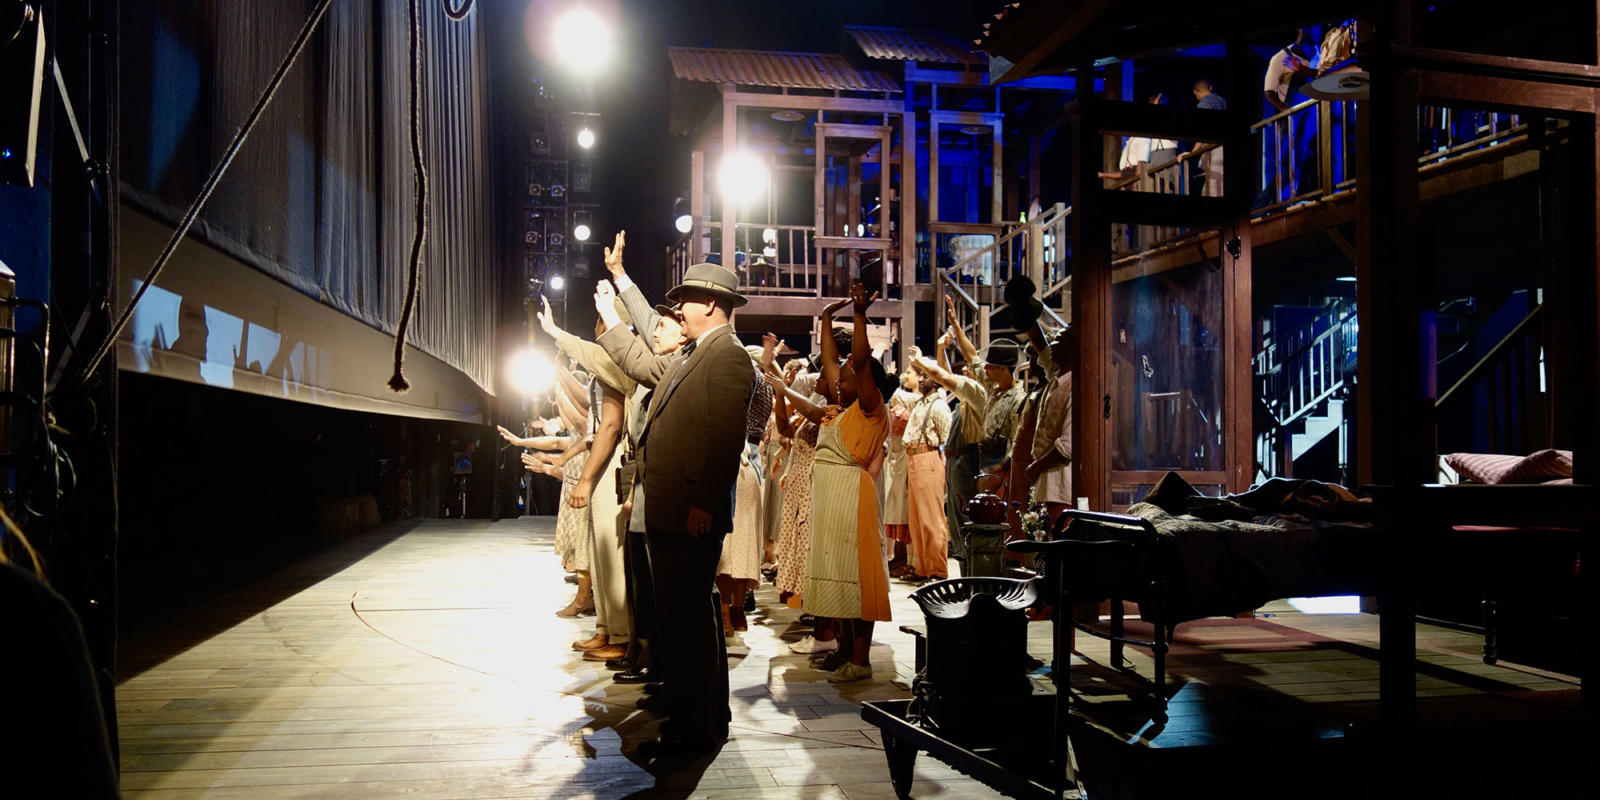 The curtain comes down on Porgy and Bess ensemble during their curtain call